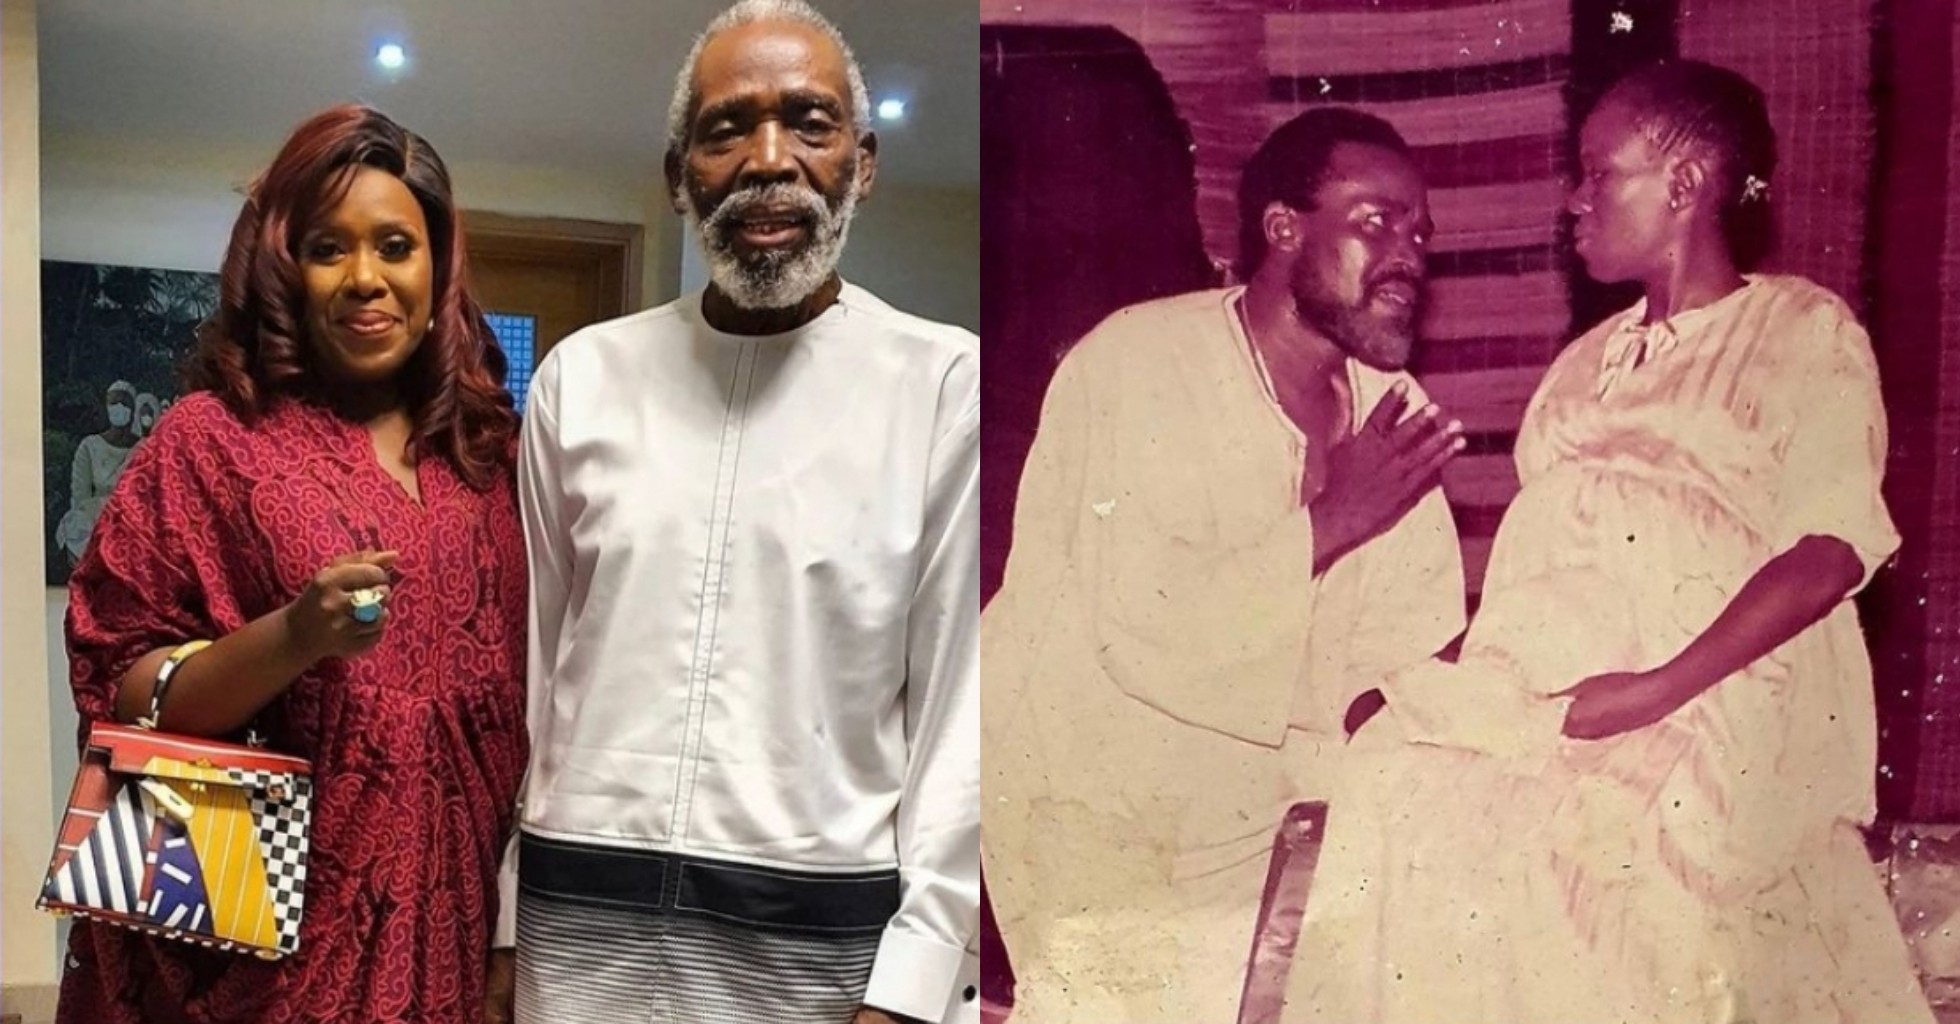 Jubilation as Olu Jacobs stars in new stage play for 80th birthday